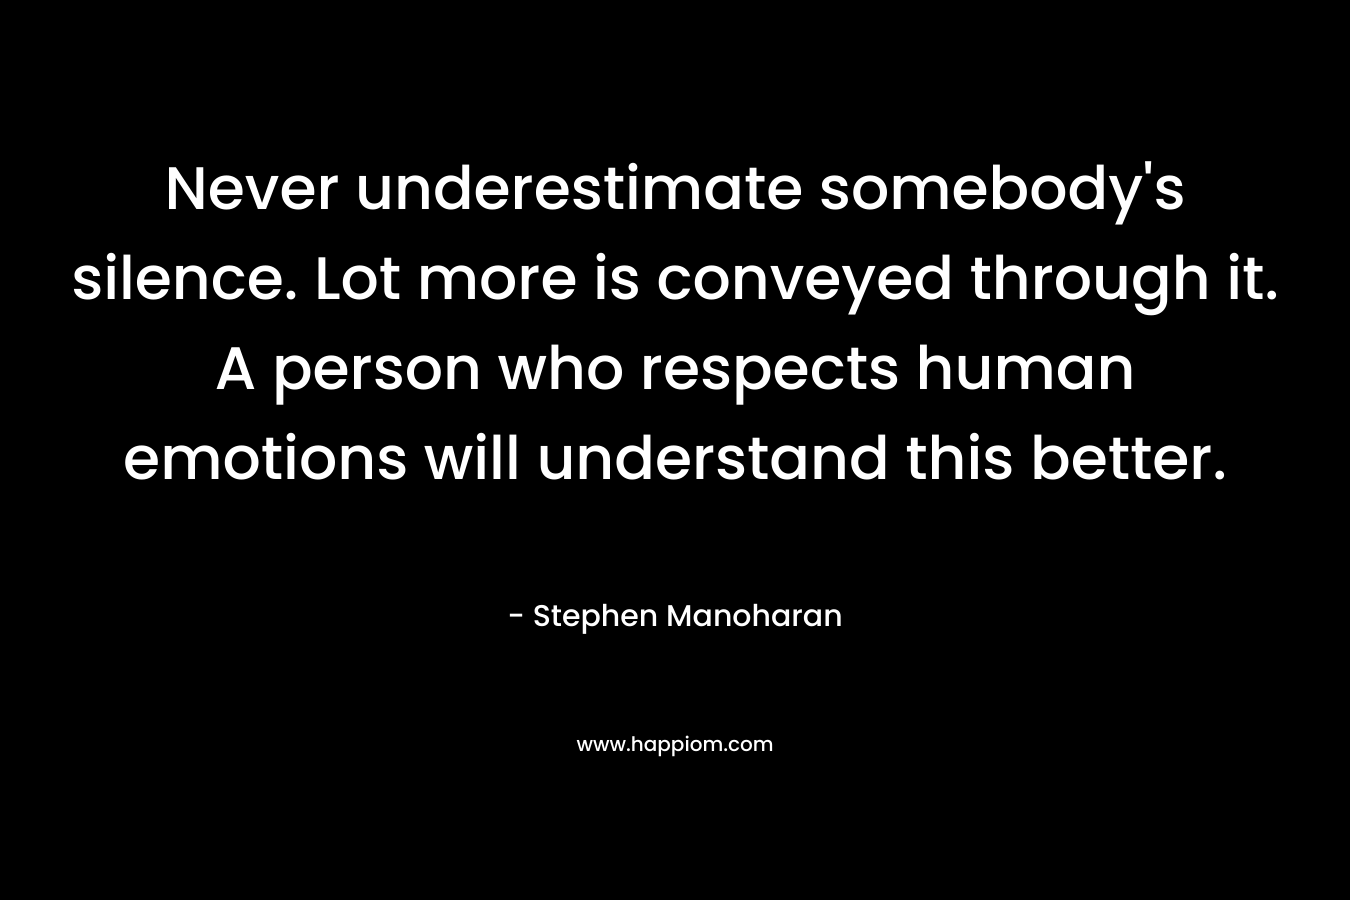 Never underestimate somebody's silence. Lot more is conveyed through it. A person who respects human emotions will understand this better.